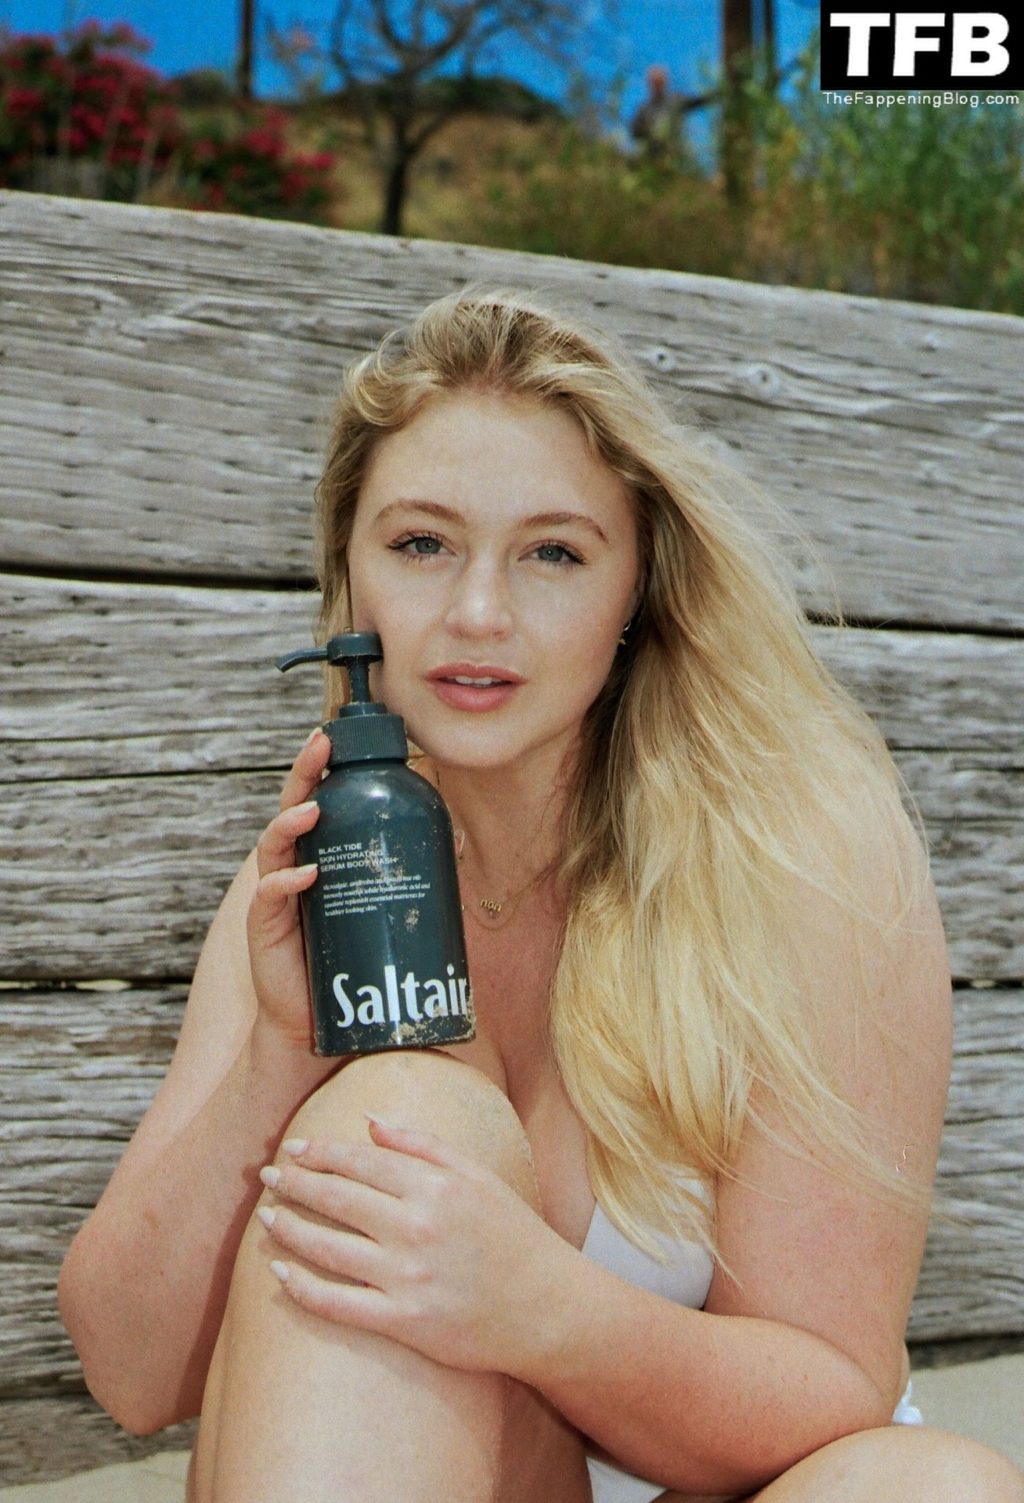 Iskra Lawrence Poses for Her Saltair Skin Care Products in Los Angeles (11 Photos)